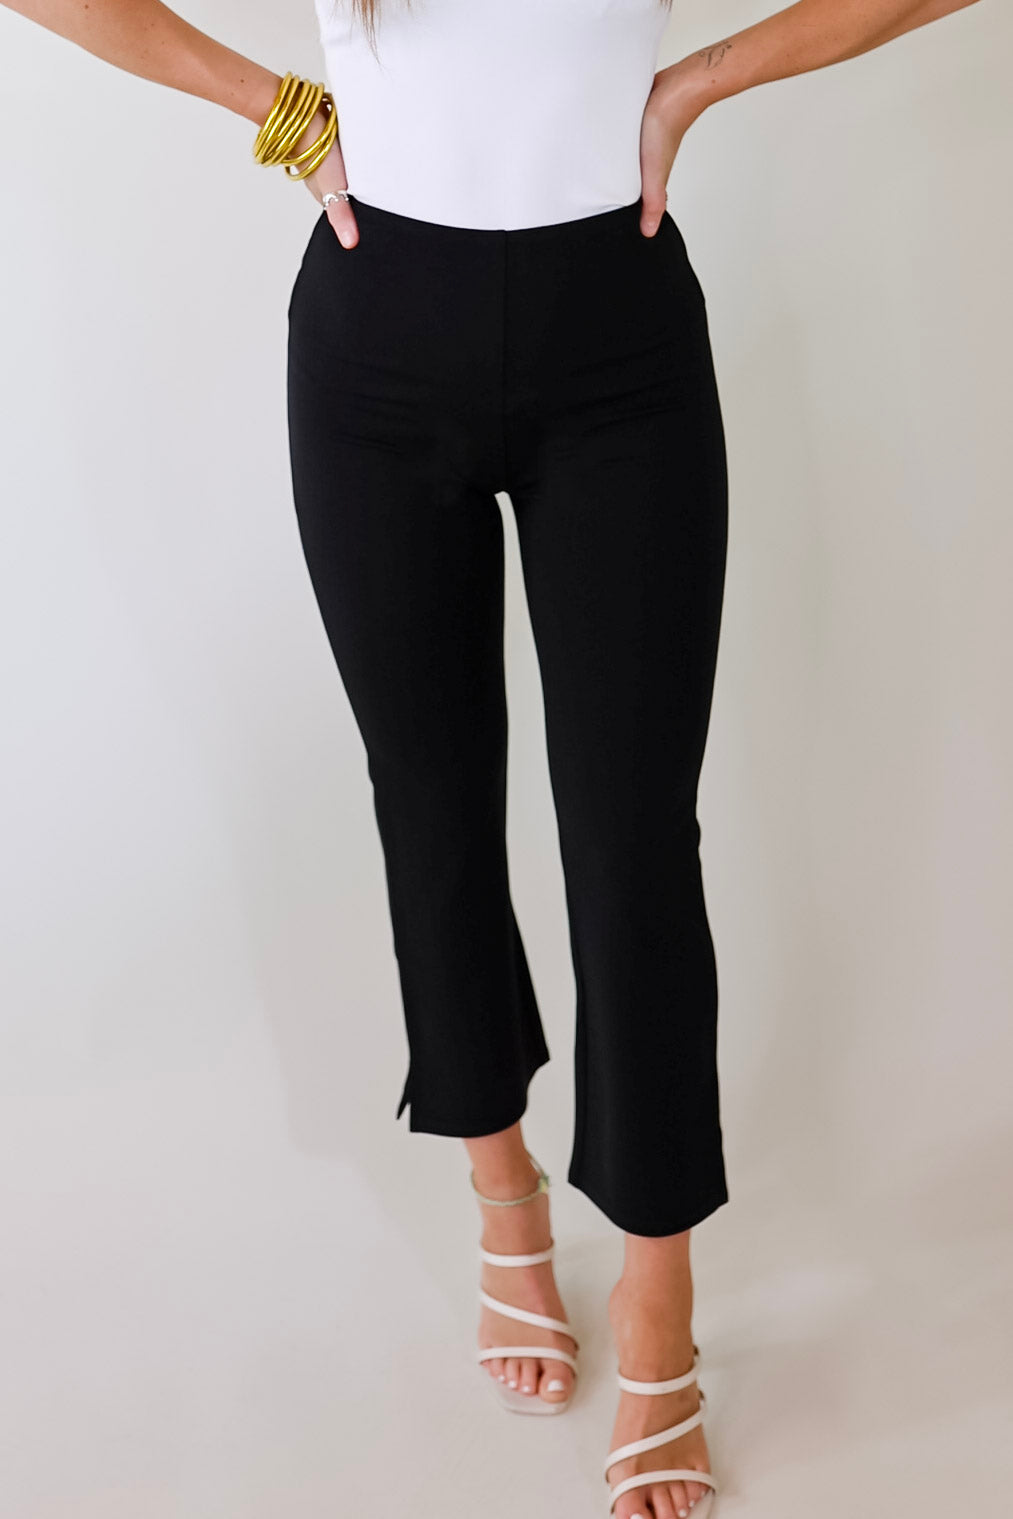 Lyssé | Cropped Kick Flare Leggings in Black - Giddy Up Glamour Boutique